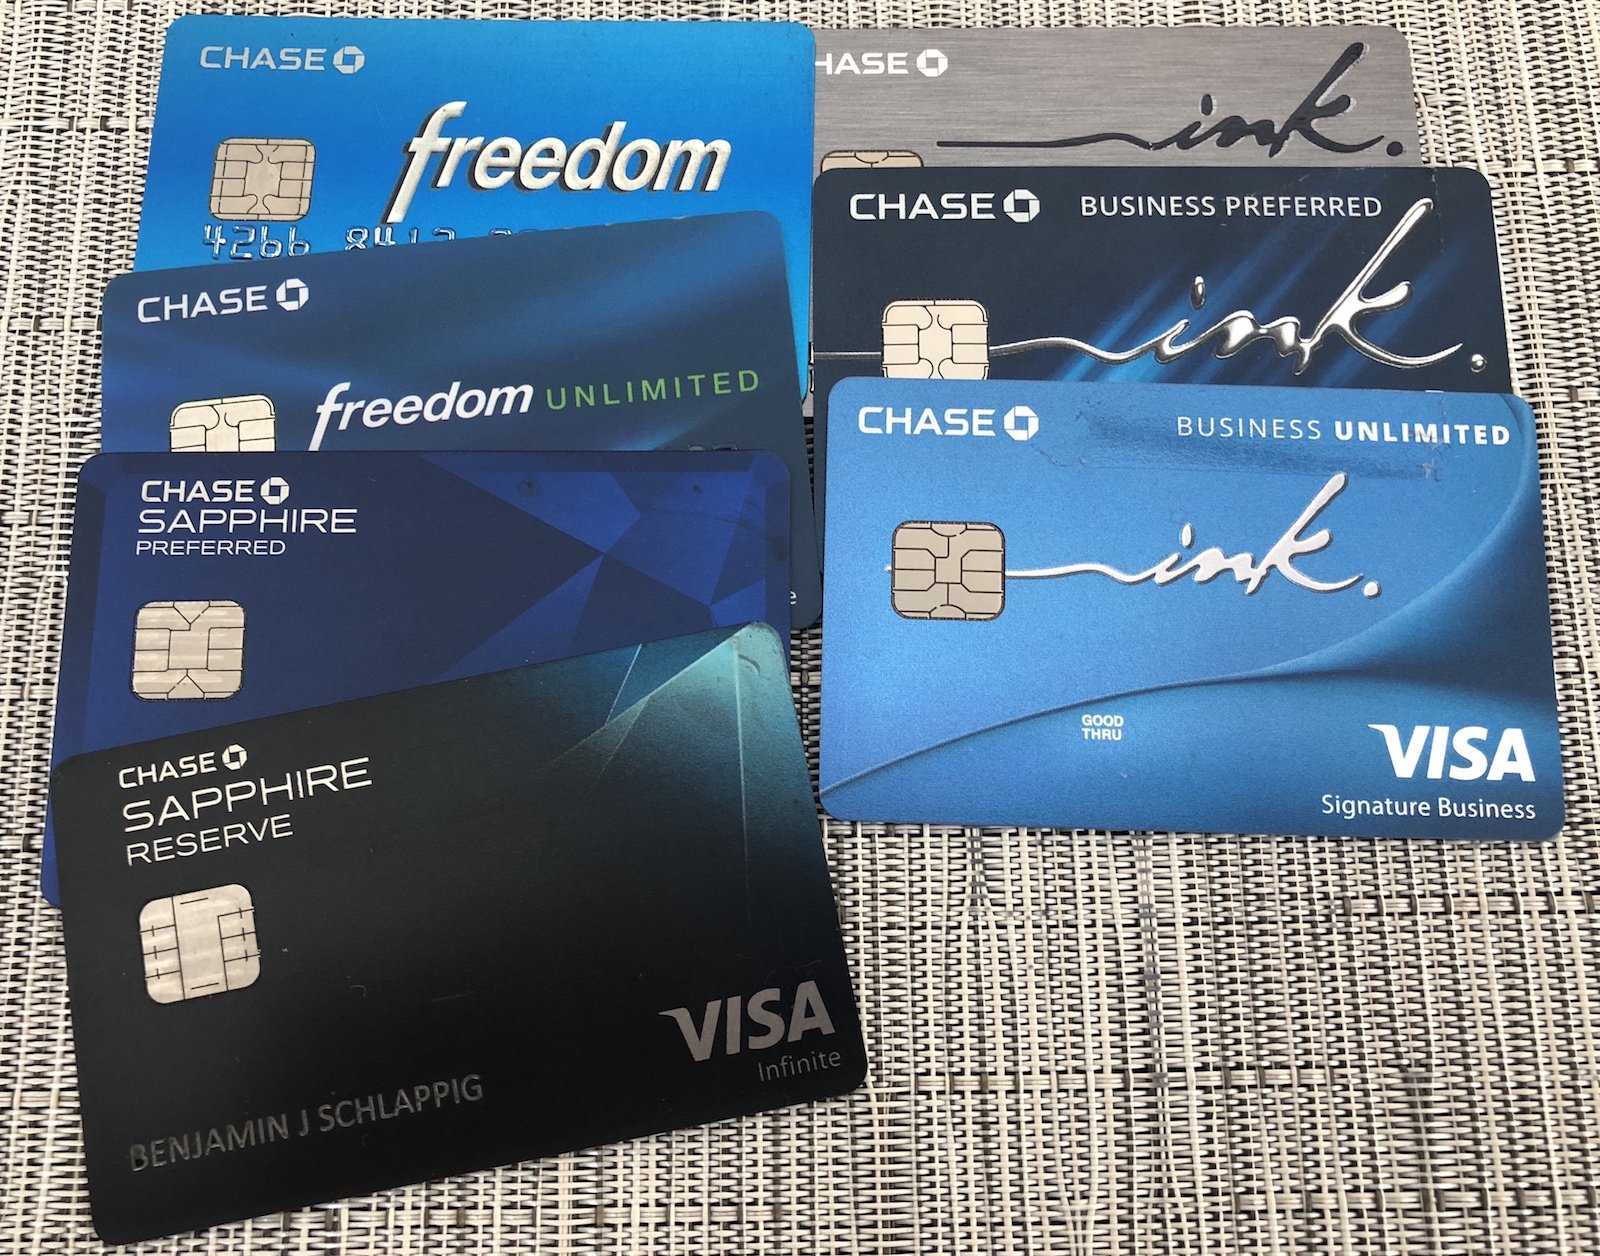 Chase Freedom Flex Vs. Freedom Unlimited Which Is Best? One Mile at